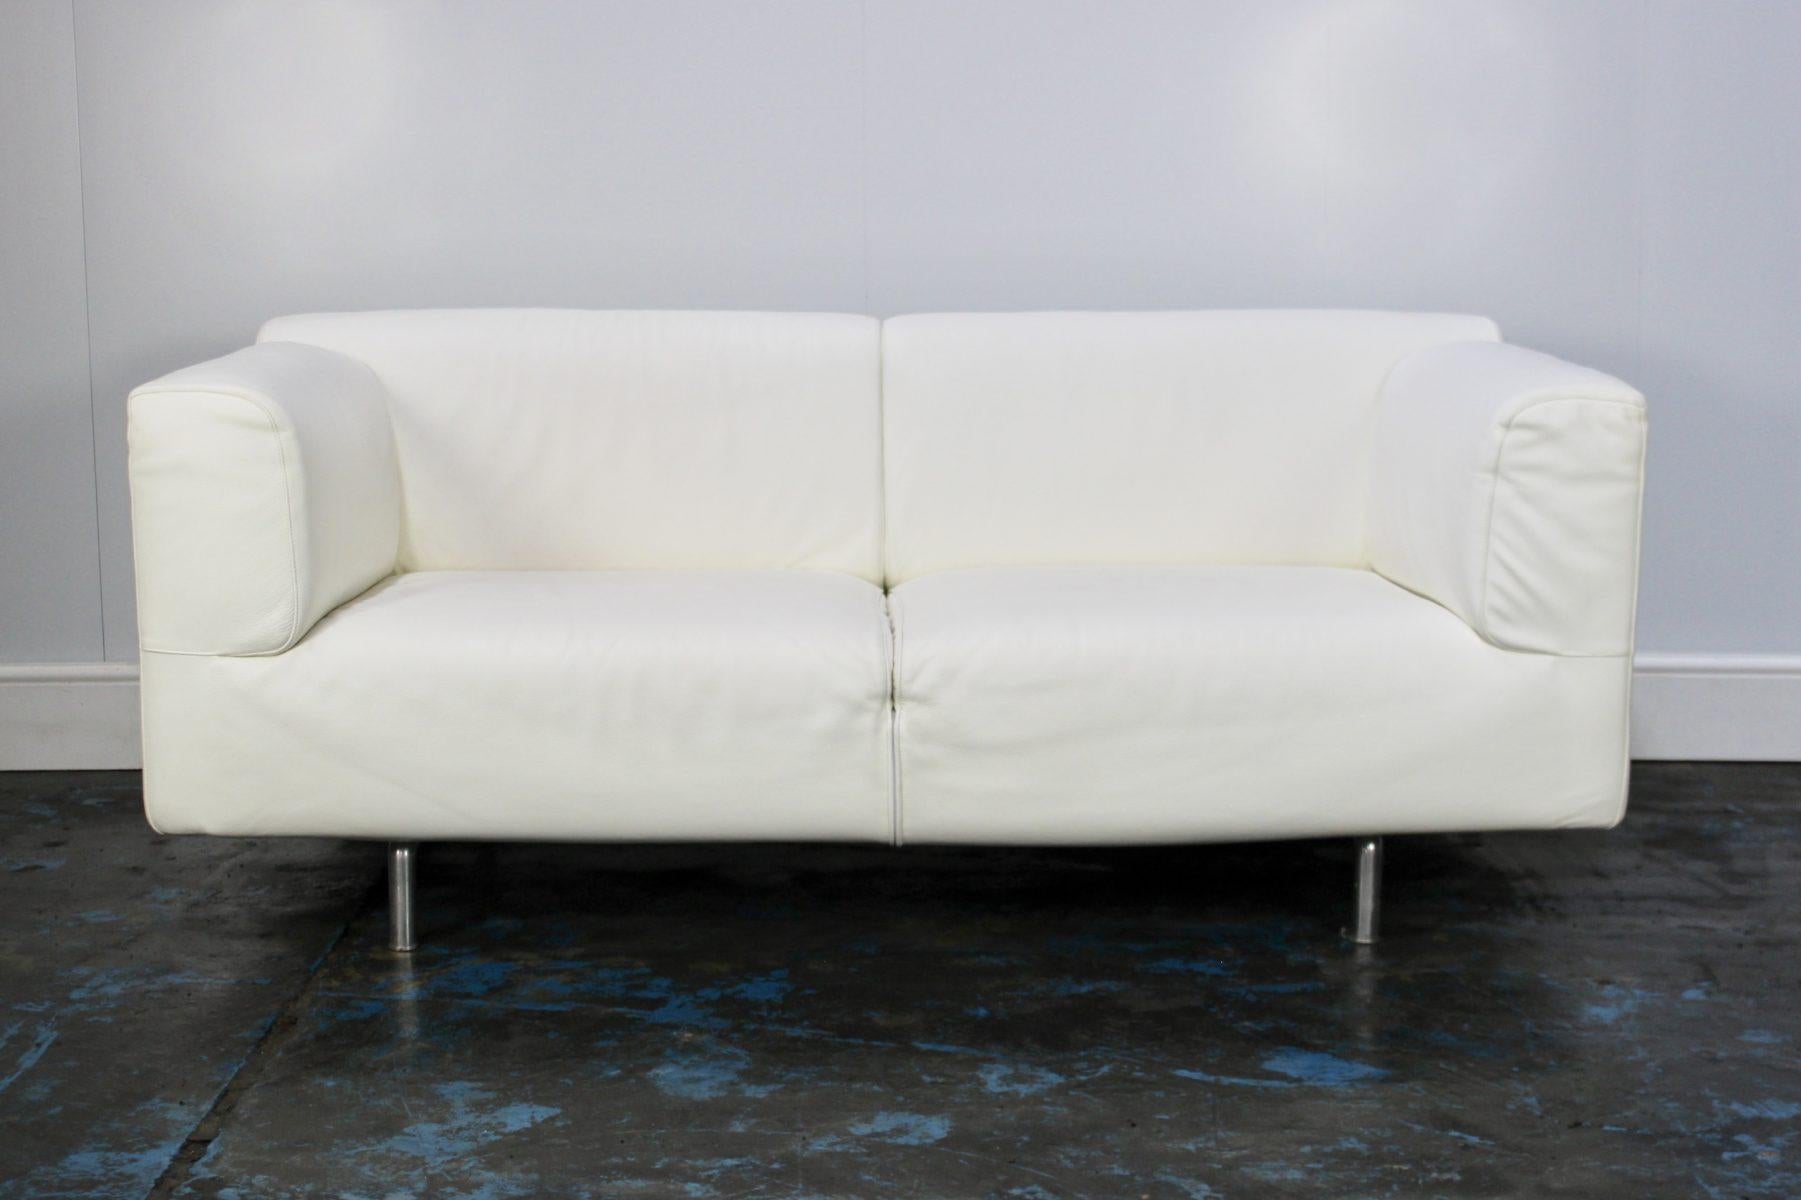 On offer on this occasion is superb, immaculately-presented “250 Met 250.20” 2-Seat (but actually seats 3 people in comfort) Sofa, from the world renown Italian furniture house of Cassina.

As you will no doubt be aware by your interest in this